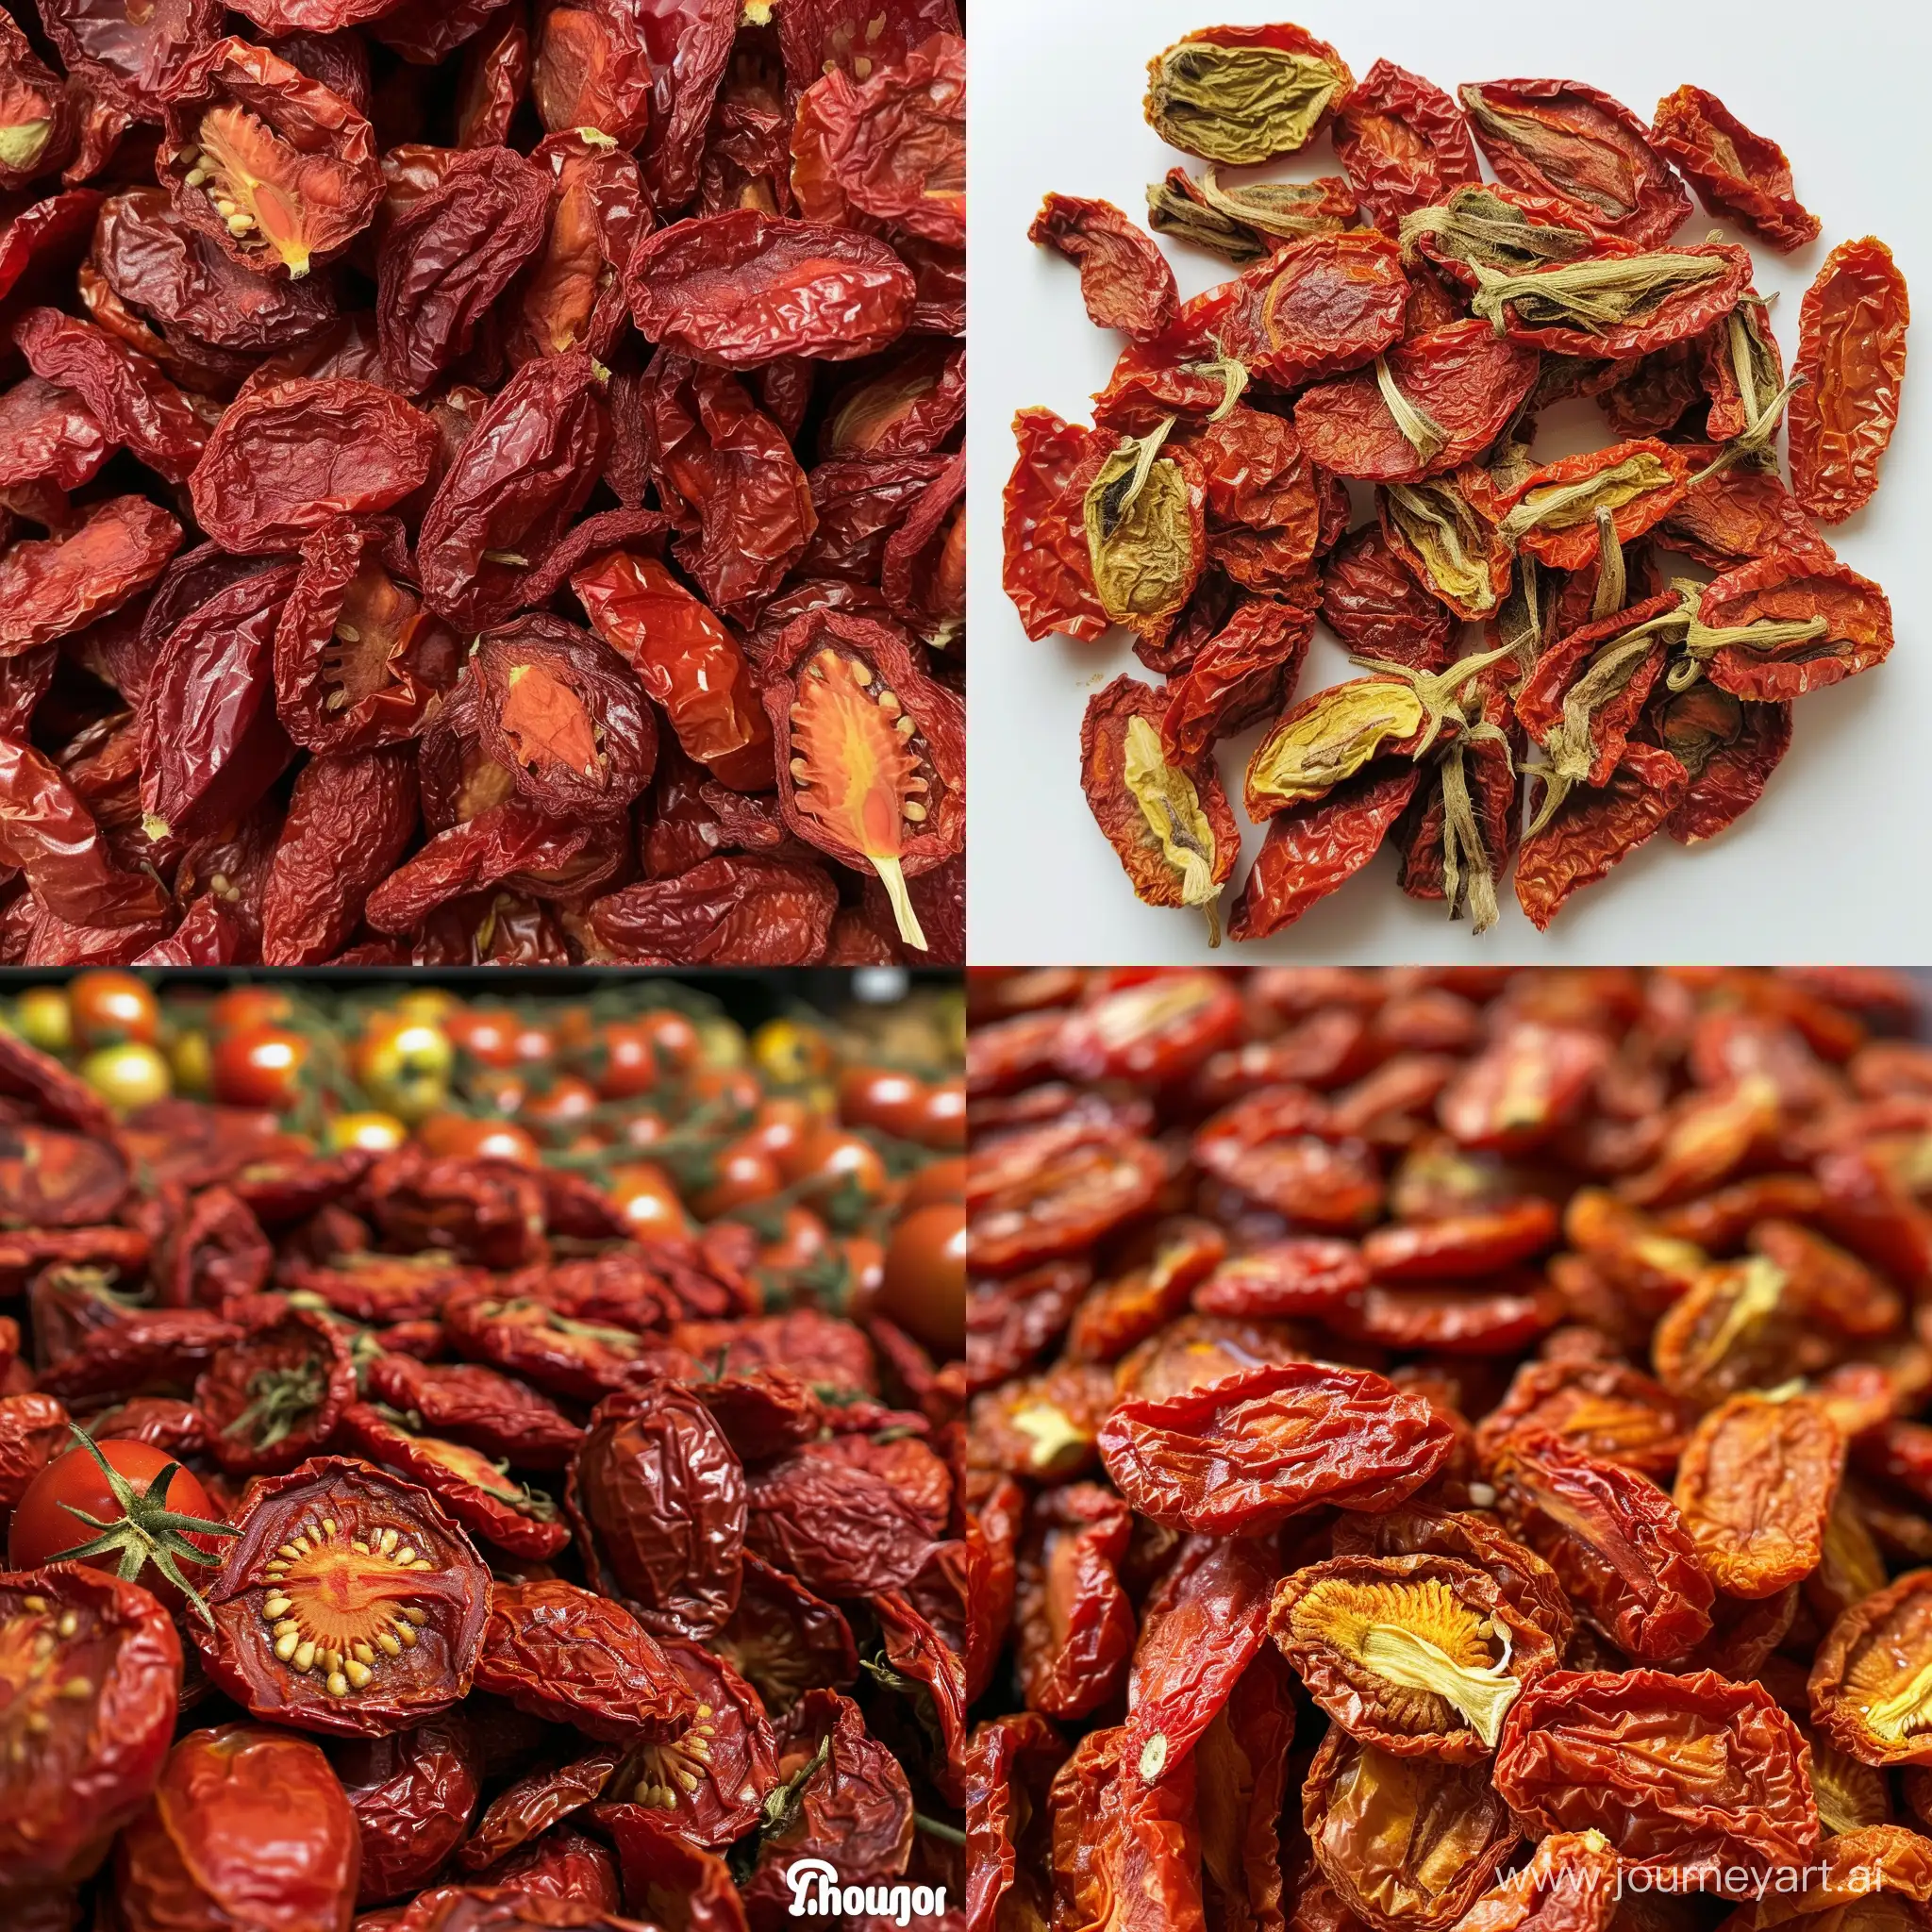 Vibrant-Array-of-Dried-Tomatoes-Exquisite-Still-Life-Photography